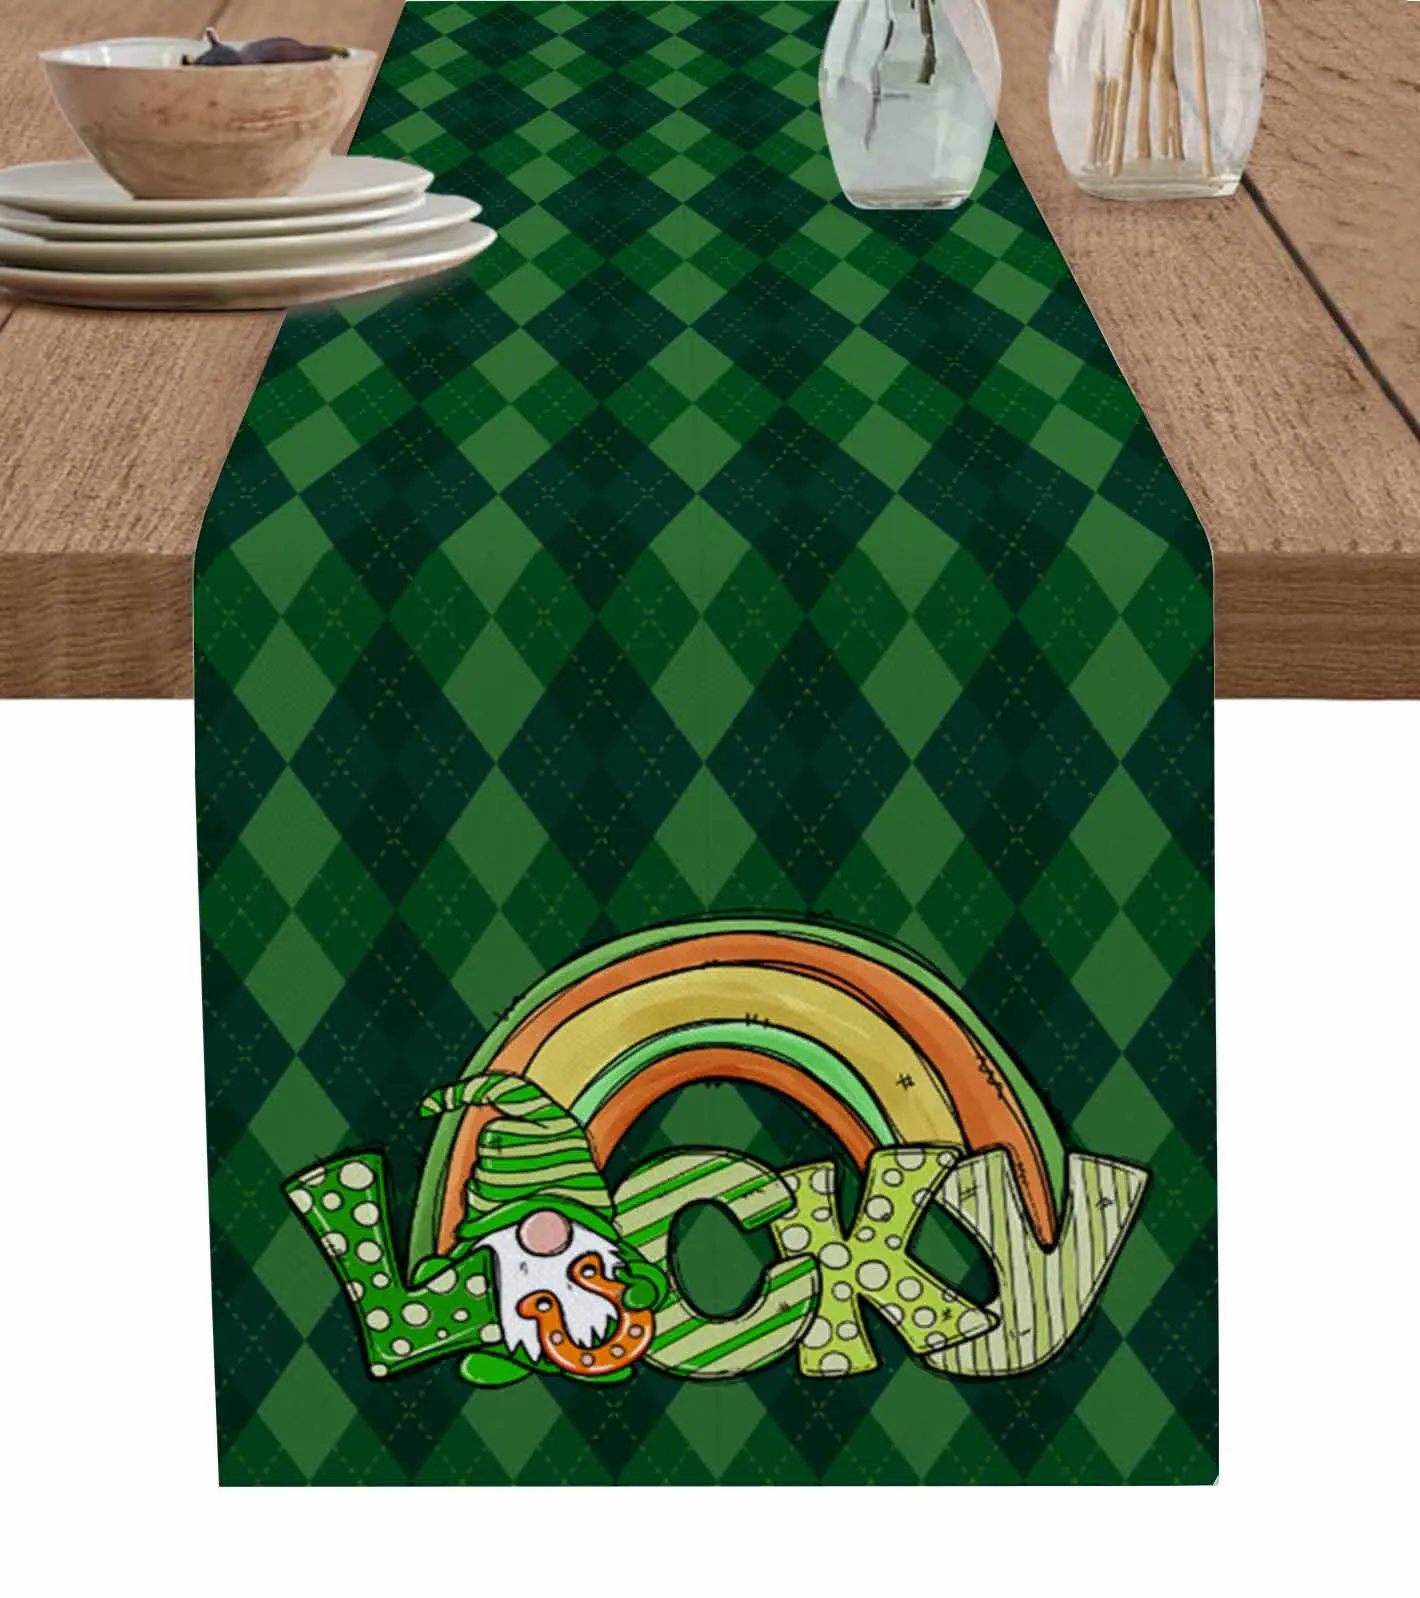 

St. Patrick'S Day Dwarf Clover Plaid Pattern Wedding Table Runner Kitchen Placemats Party Home Decor Festival Holiday Tablecloth